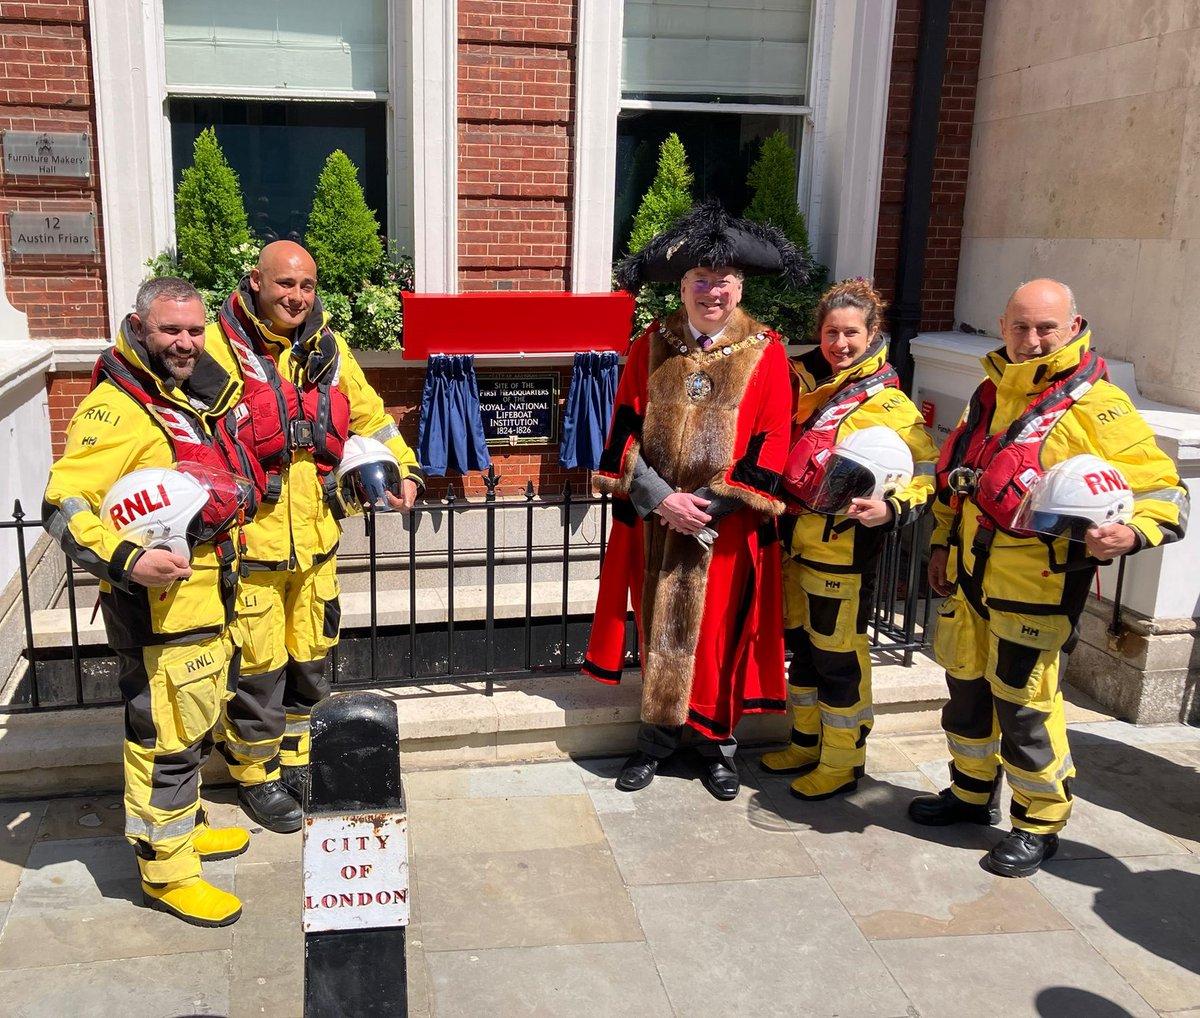 Did you know that the @RNLI was founded right here in the City of London in 1824? 200 years later RNLI volunteers and staff have saved over 146,270 lives - an average of two a day! Thrilled to bestow a blue plaque on the RNLI’s first HQ today: highlighting the important role the